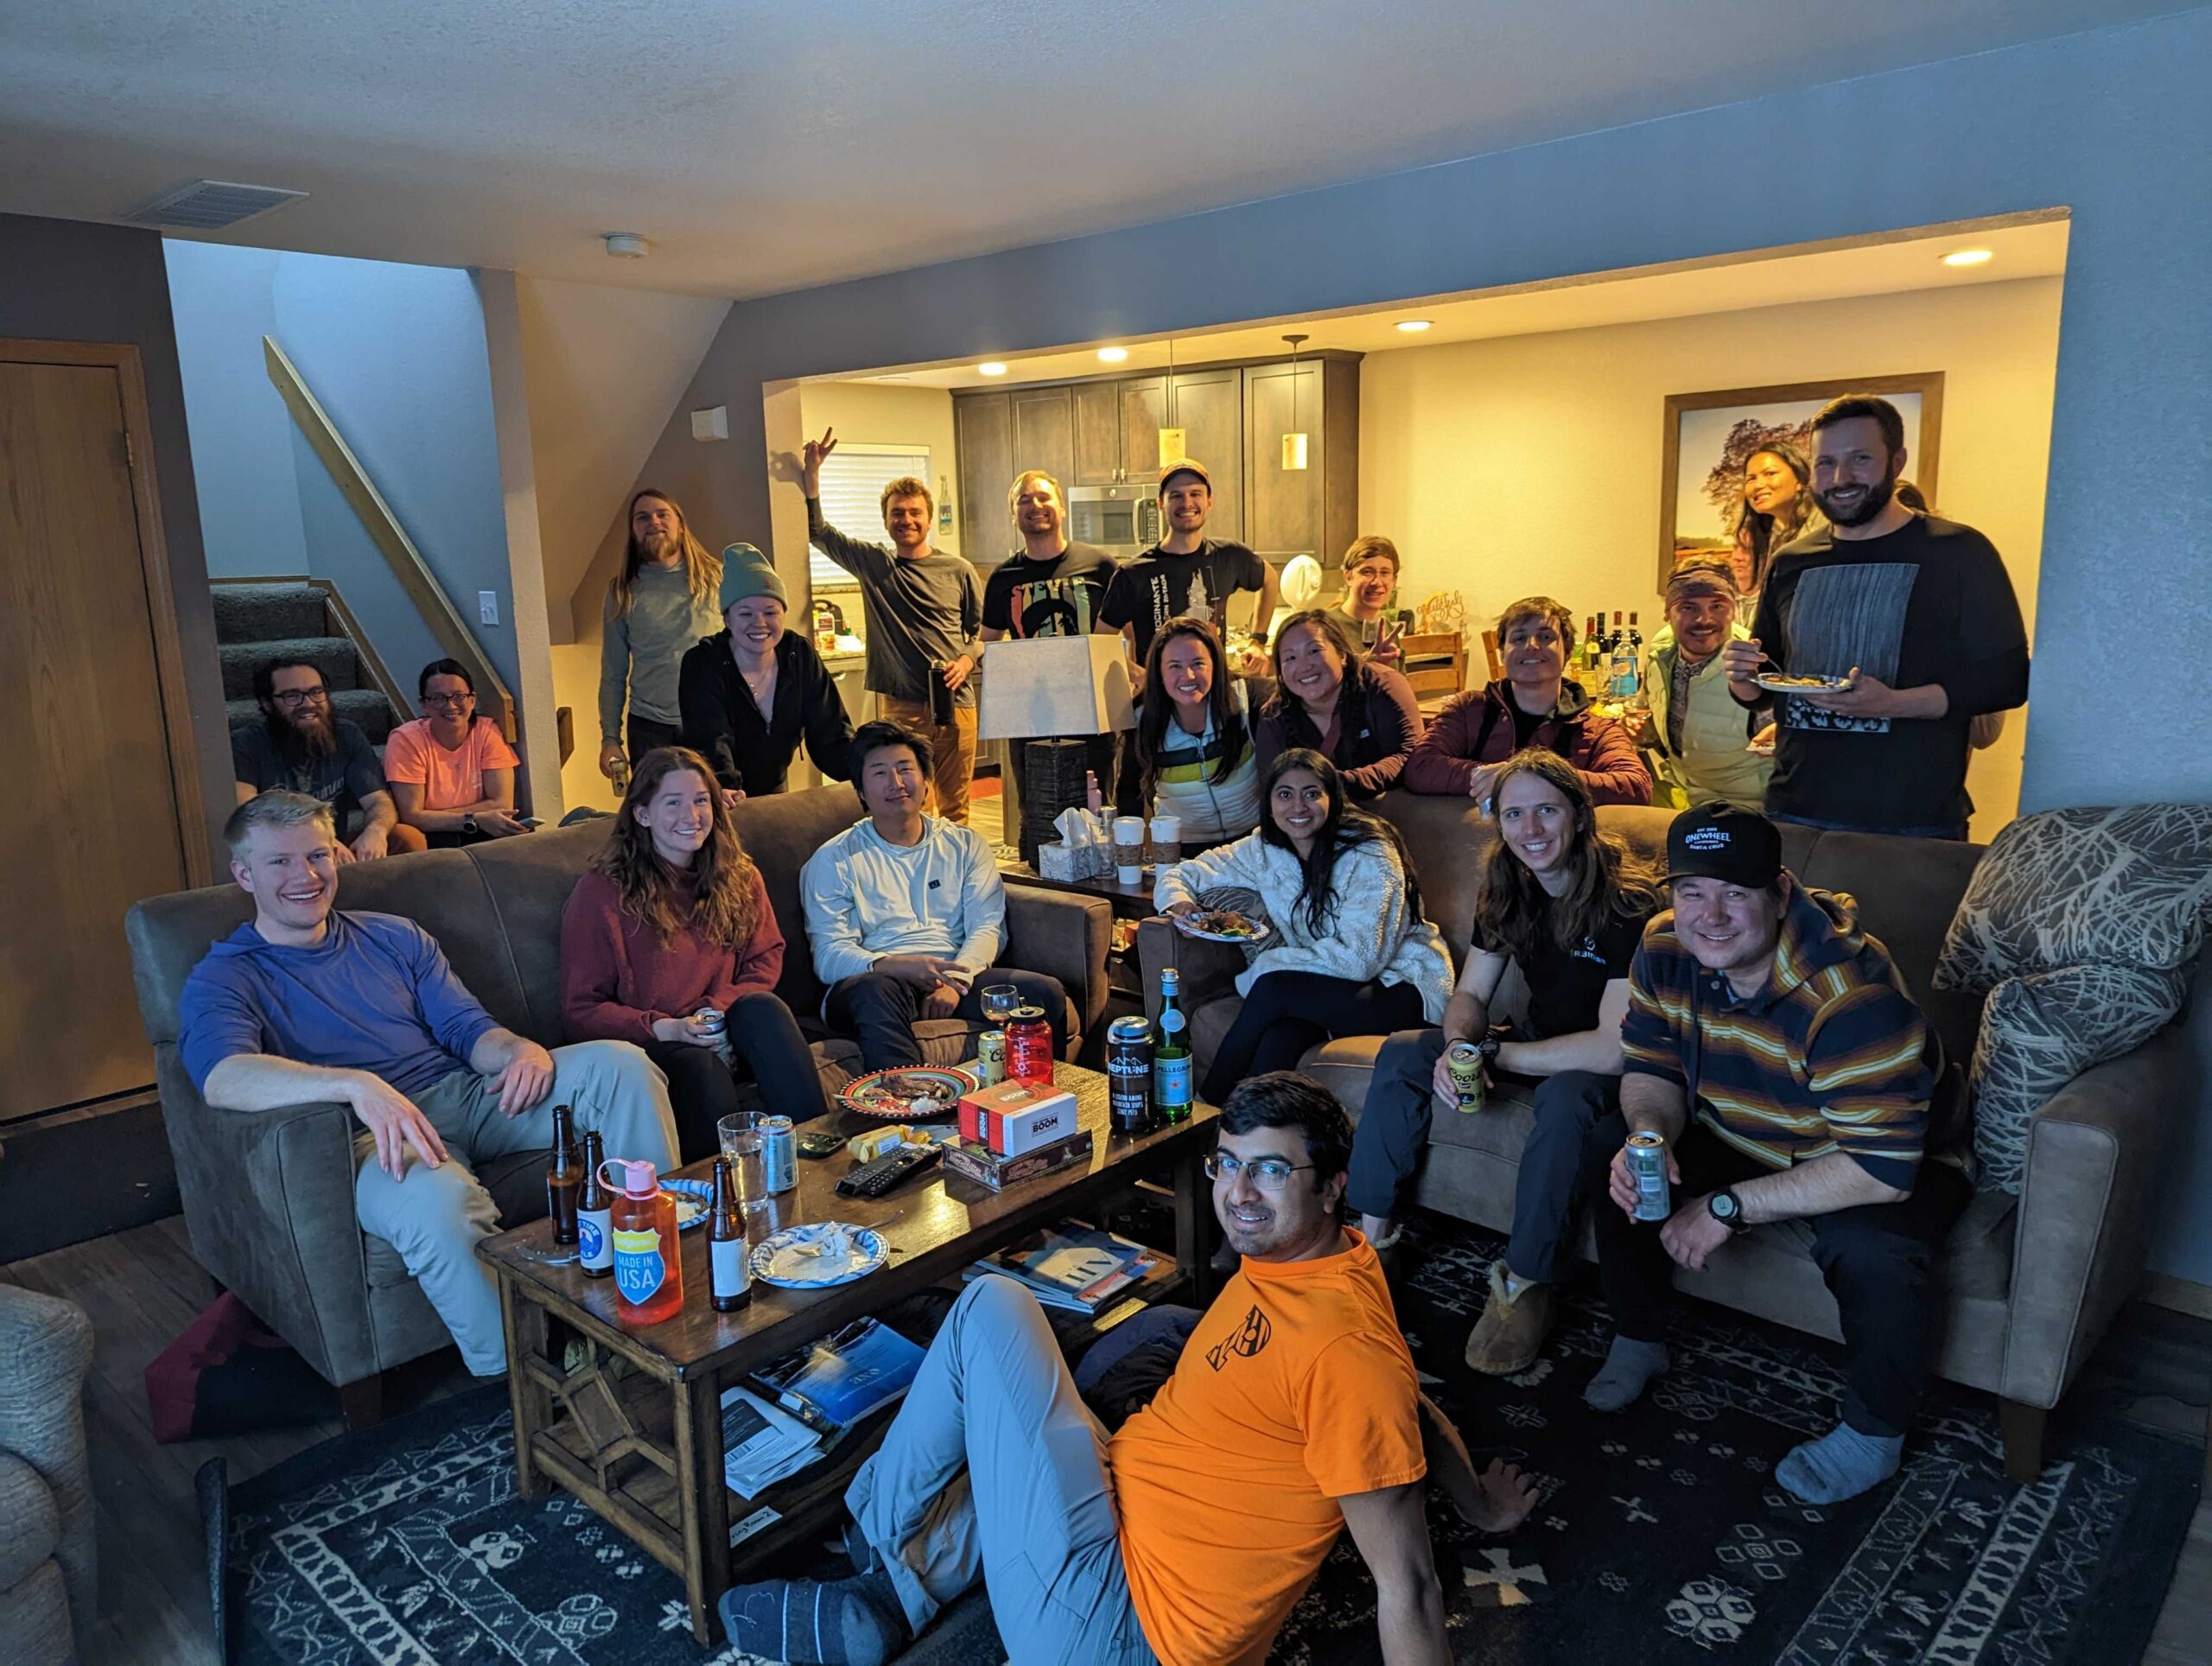 Group of people at a party